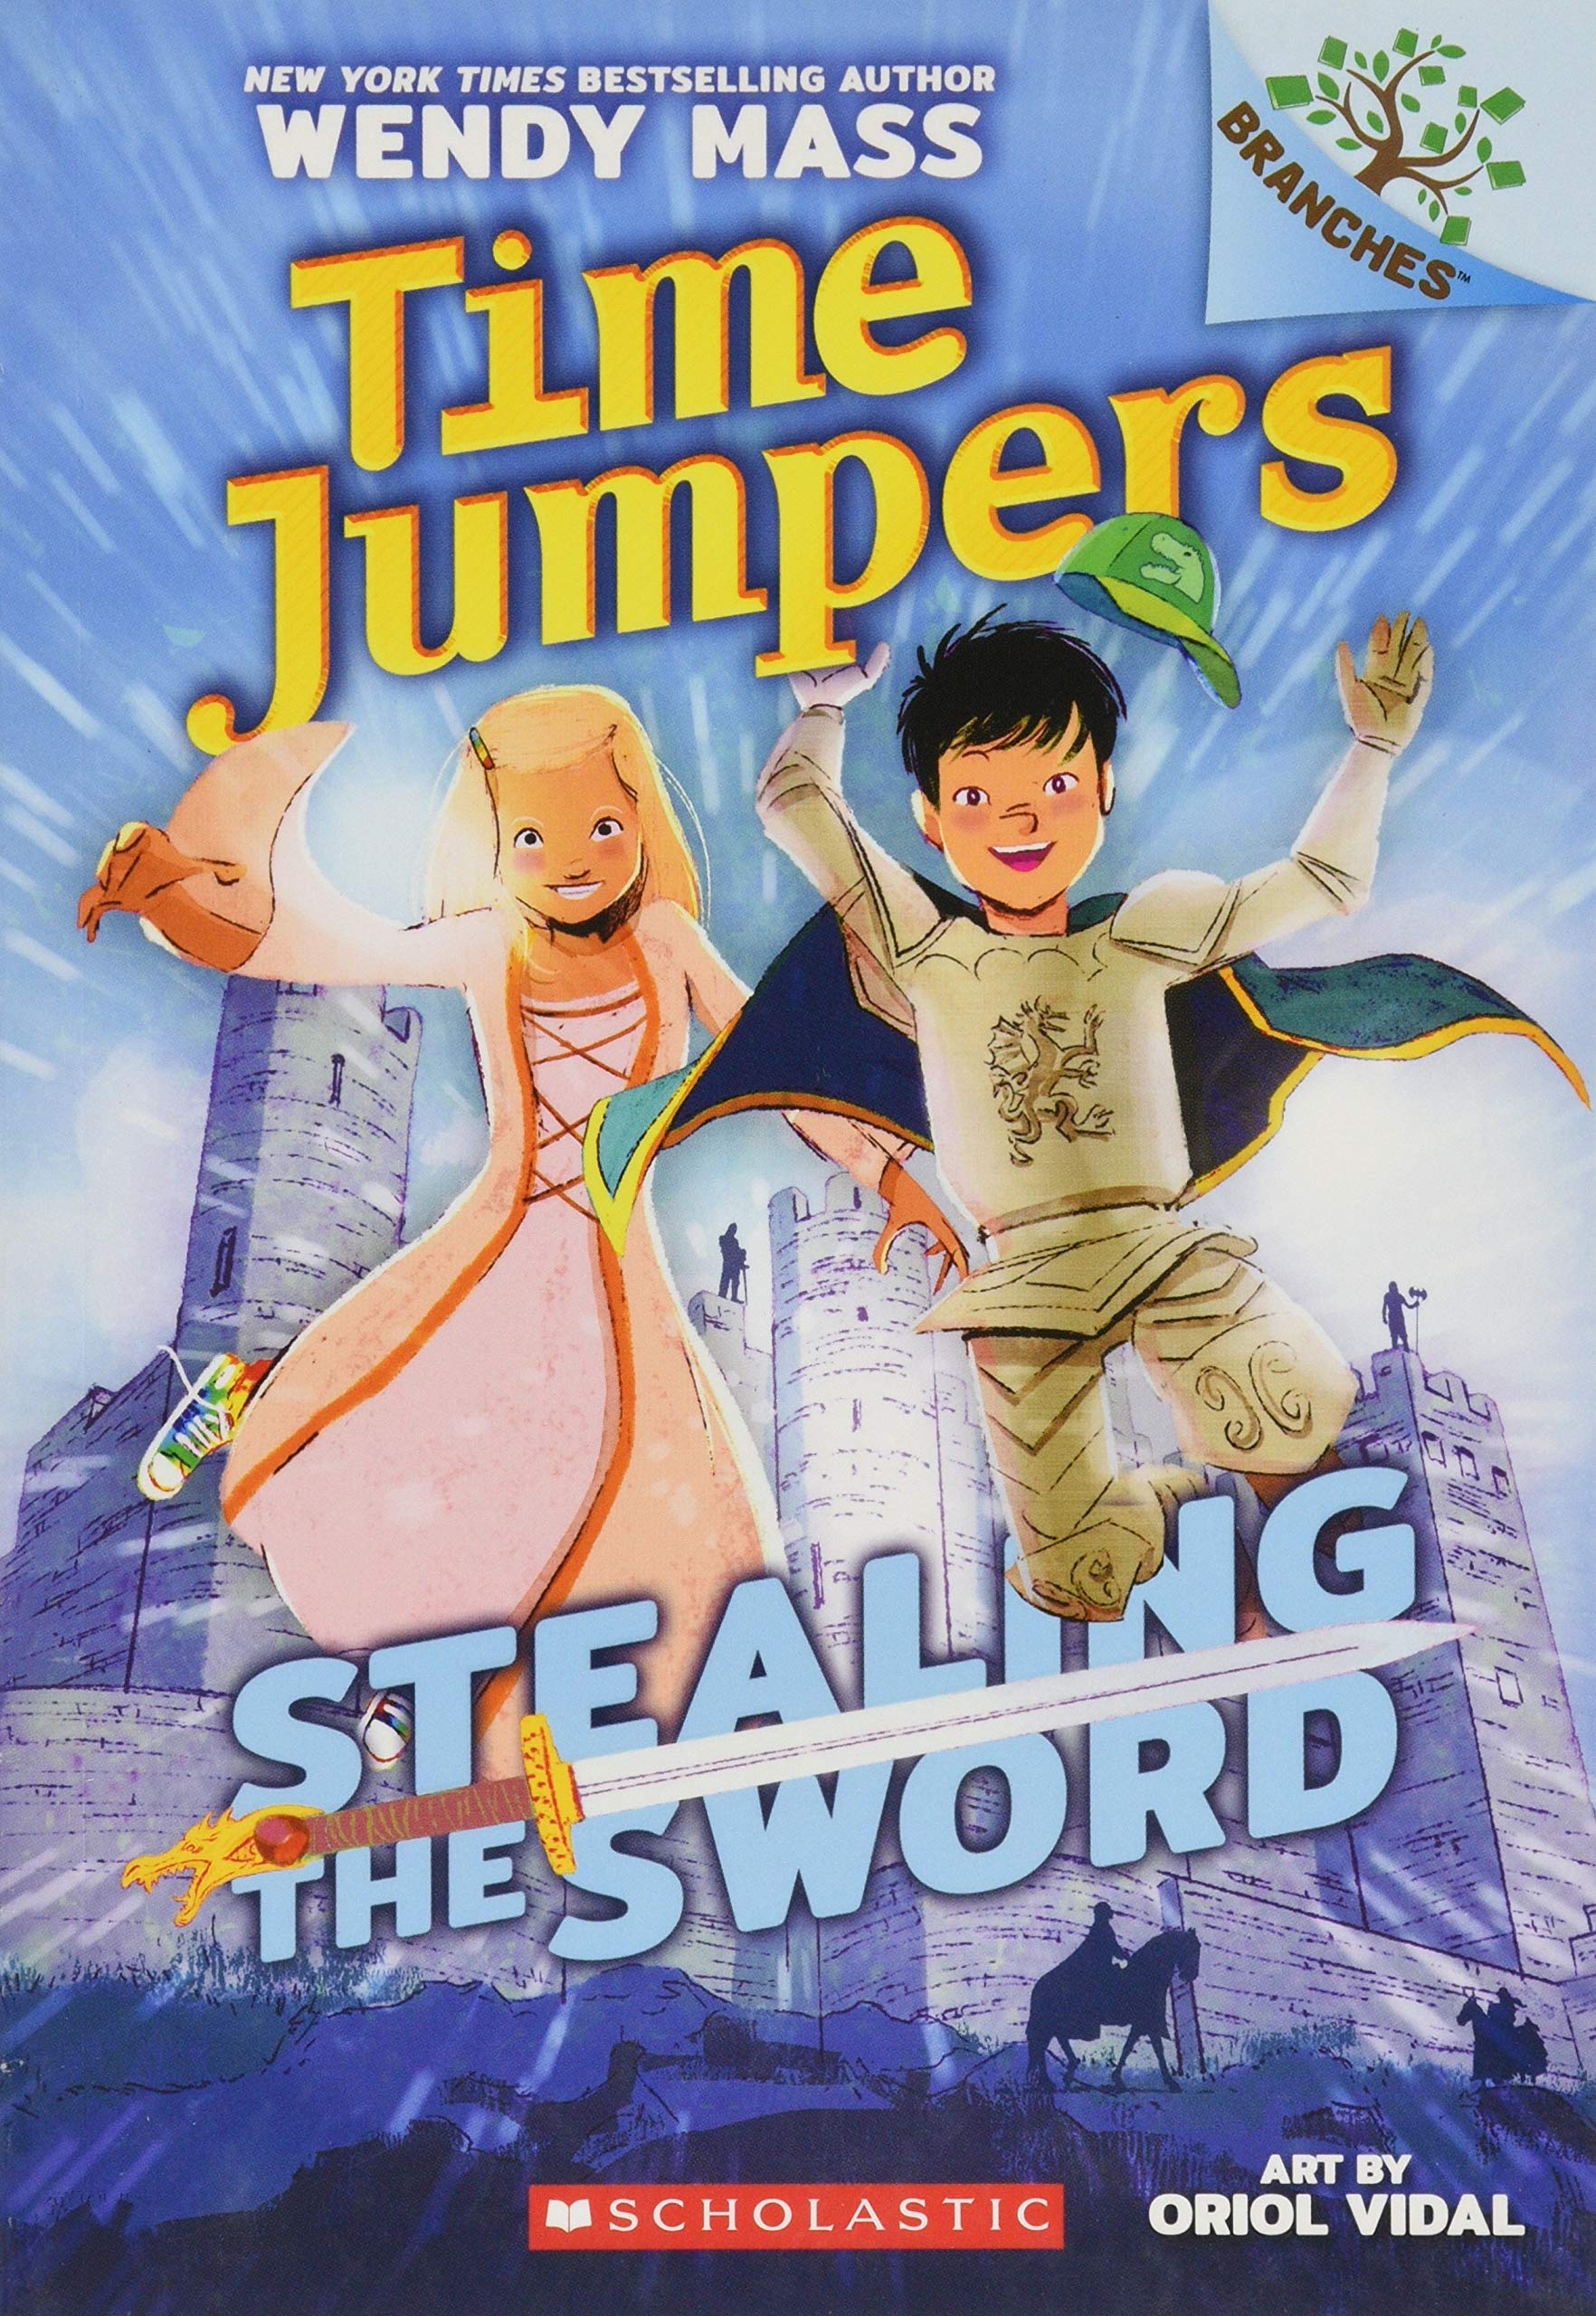 Cover of Stealing the Sword, by Wendy Mass. Shows two children with light skin in medieval dress jumping on a blue background with a castle. A sword is in the middle of the pale blue words Stealing the Sword, and the series title Time Jumpers is printed in yellow across the top.